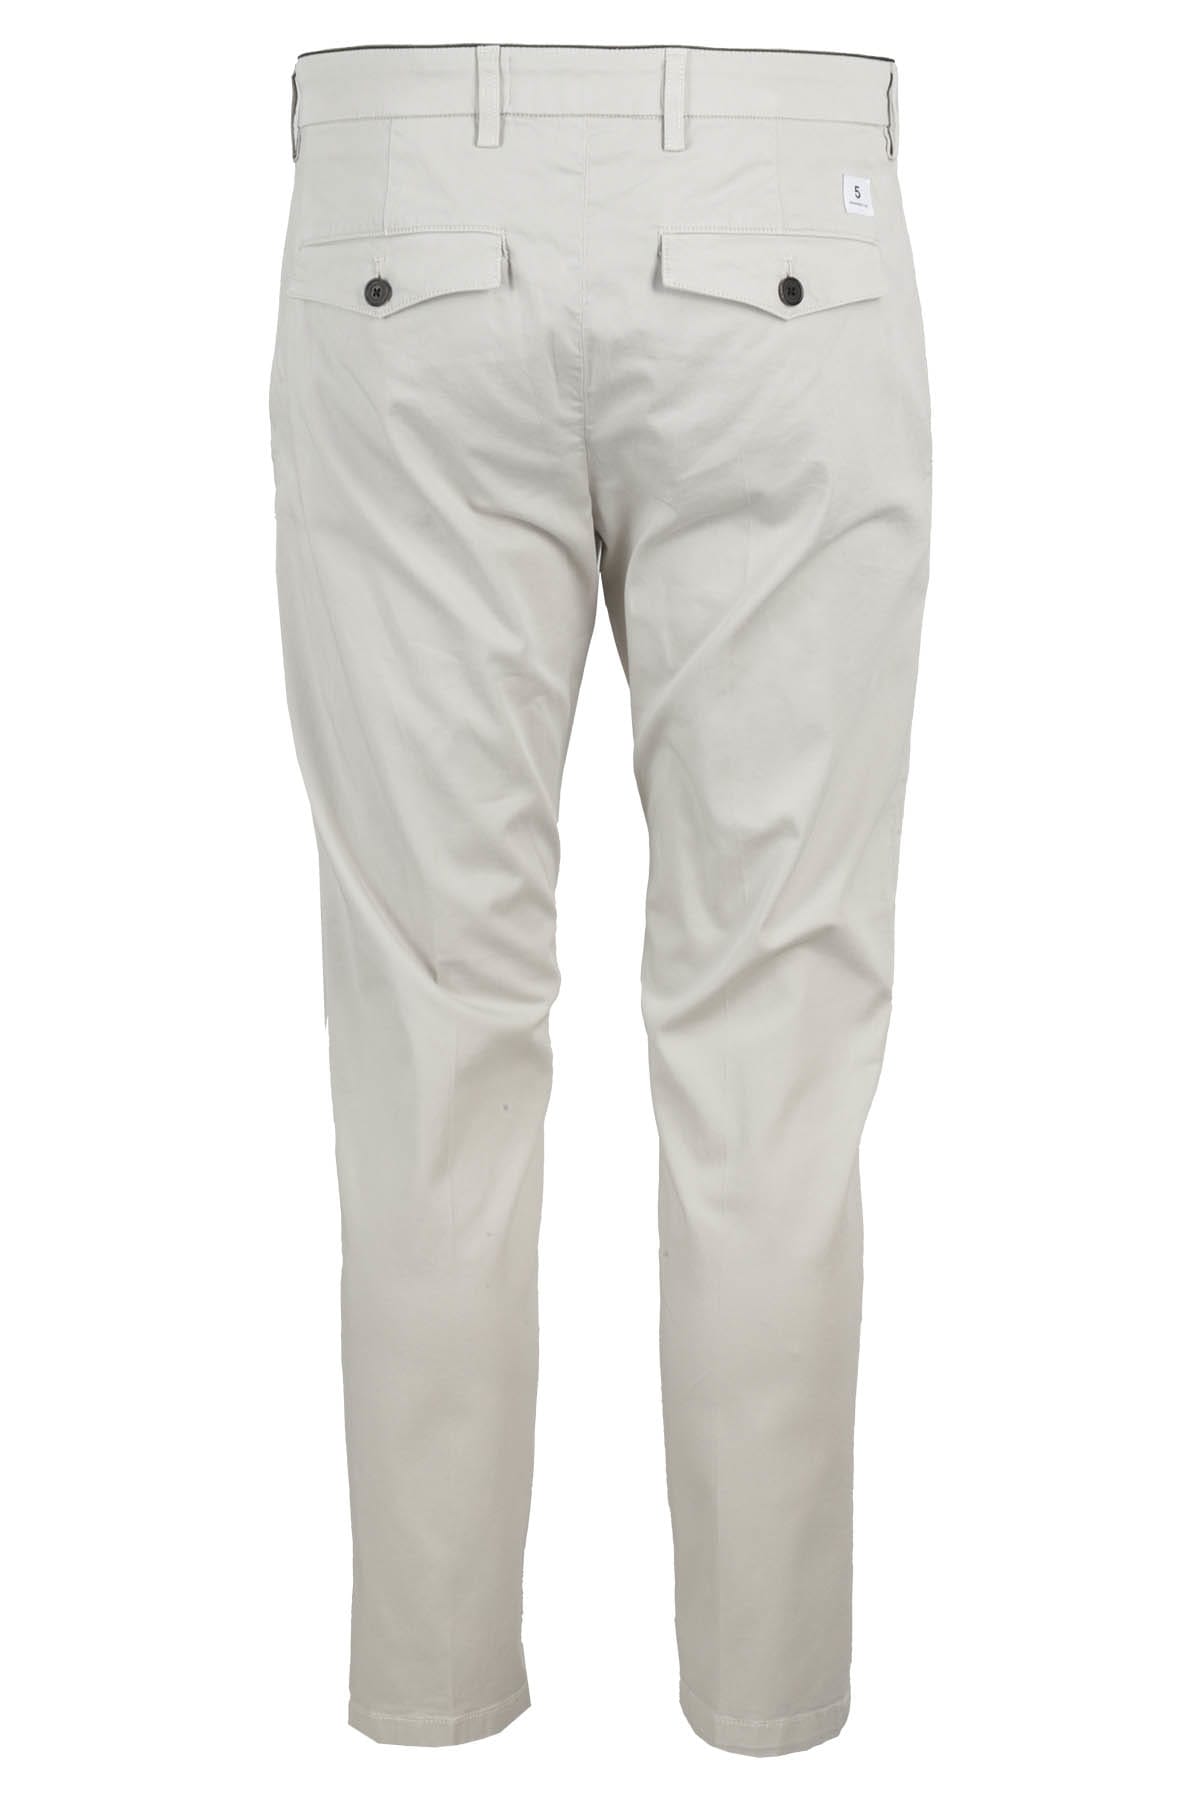 Shop Department Five Prince Pences Chinos In Stucco